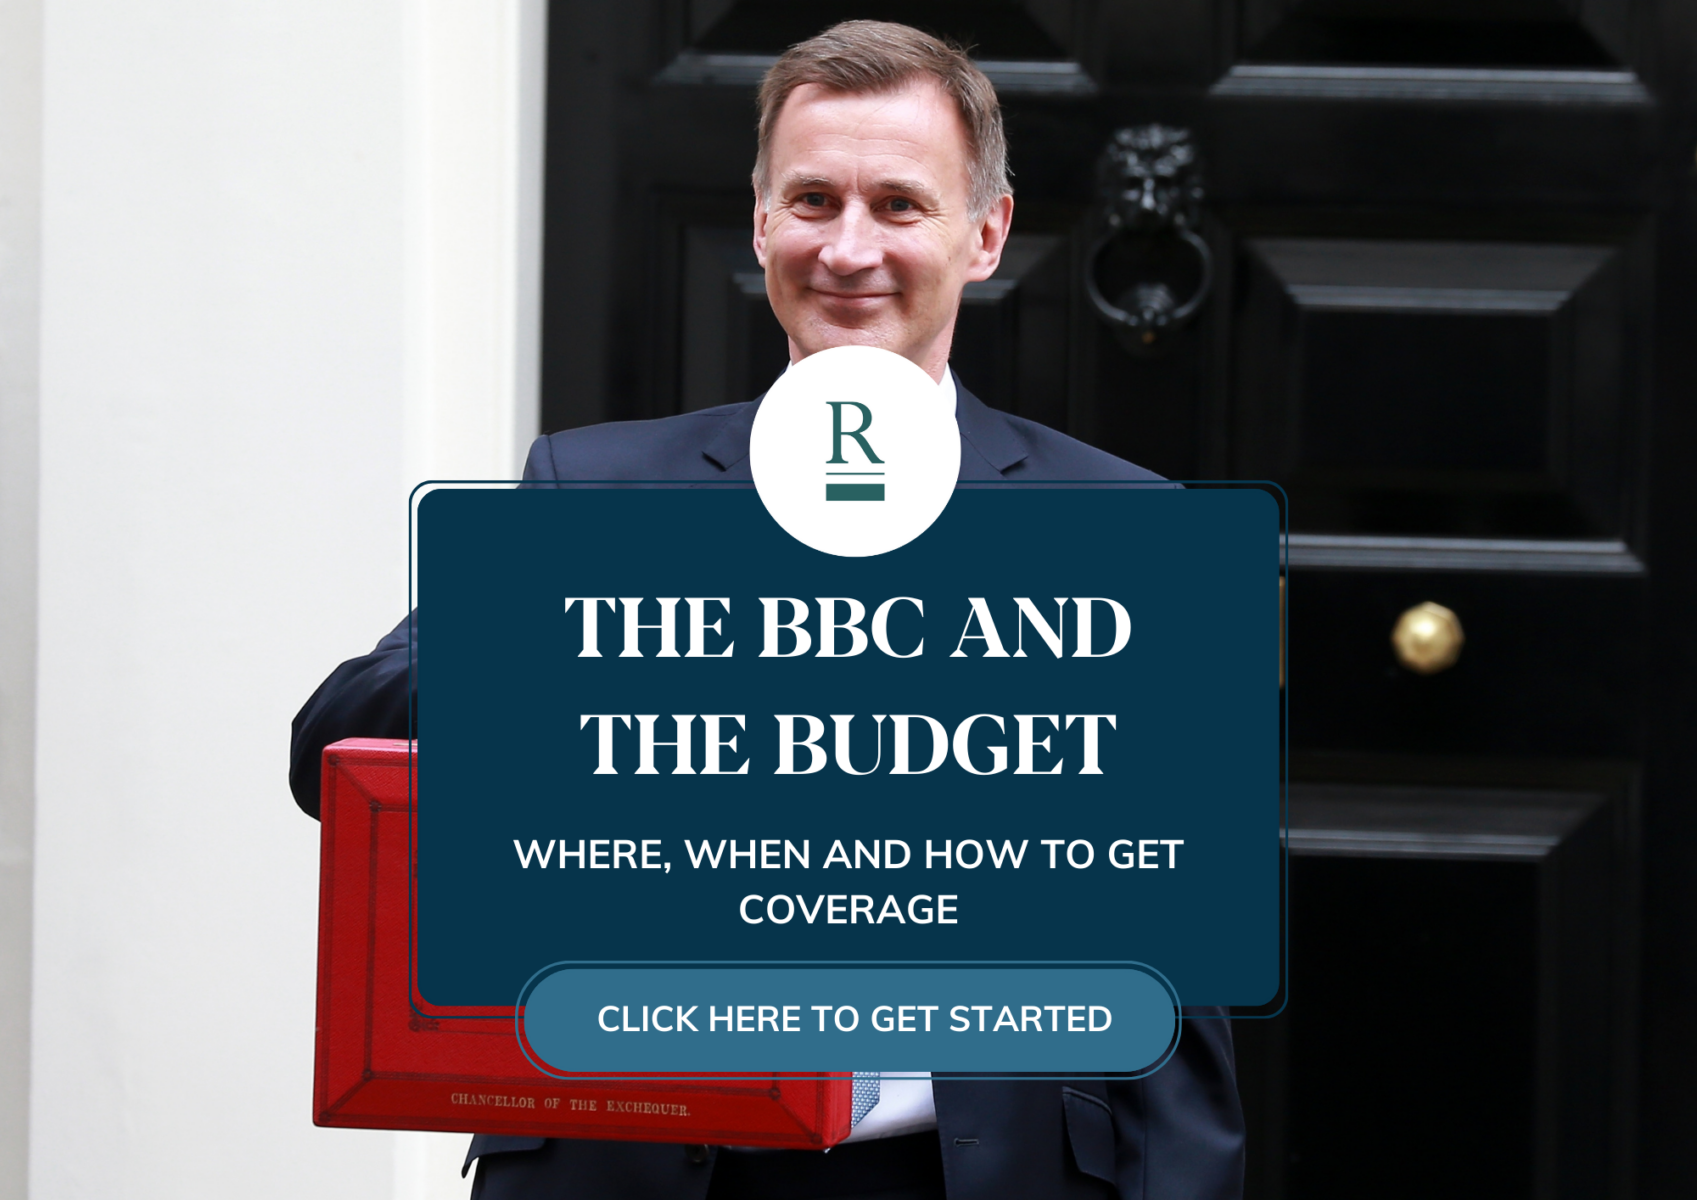 The BBC and the Budget